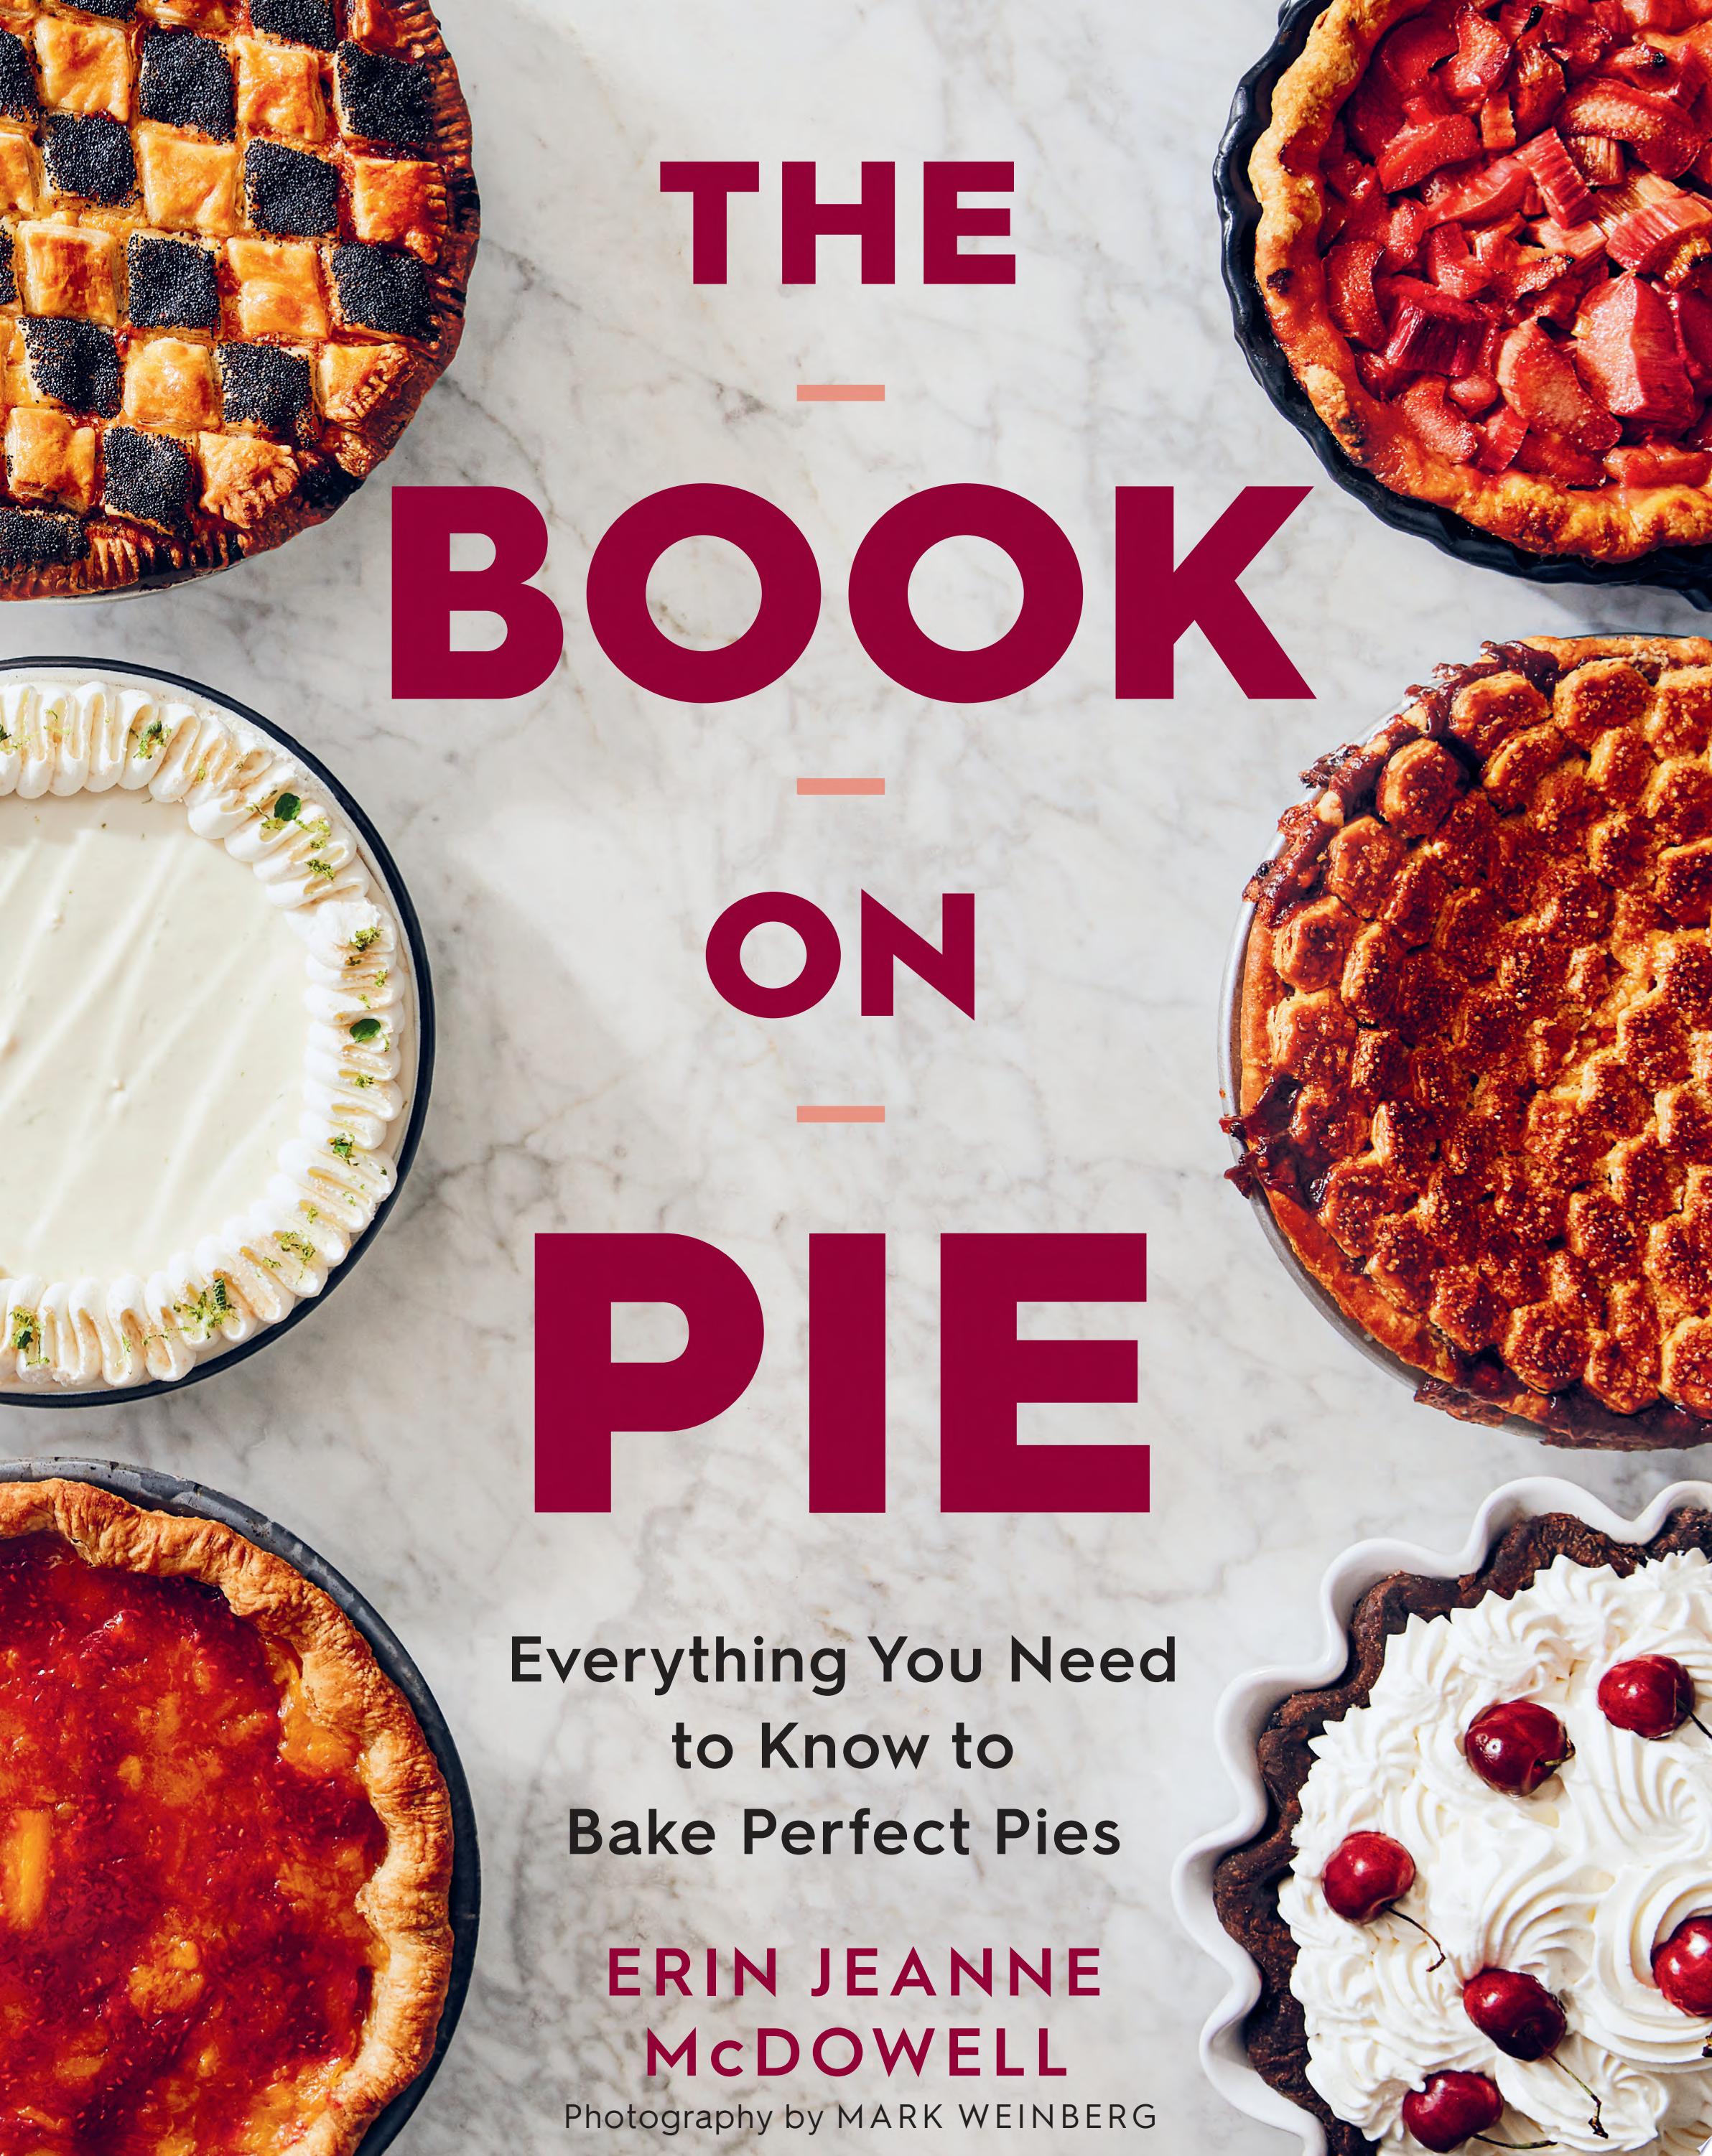 Image for "The Book on Pie"